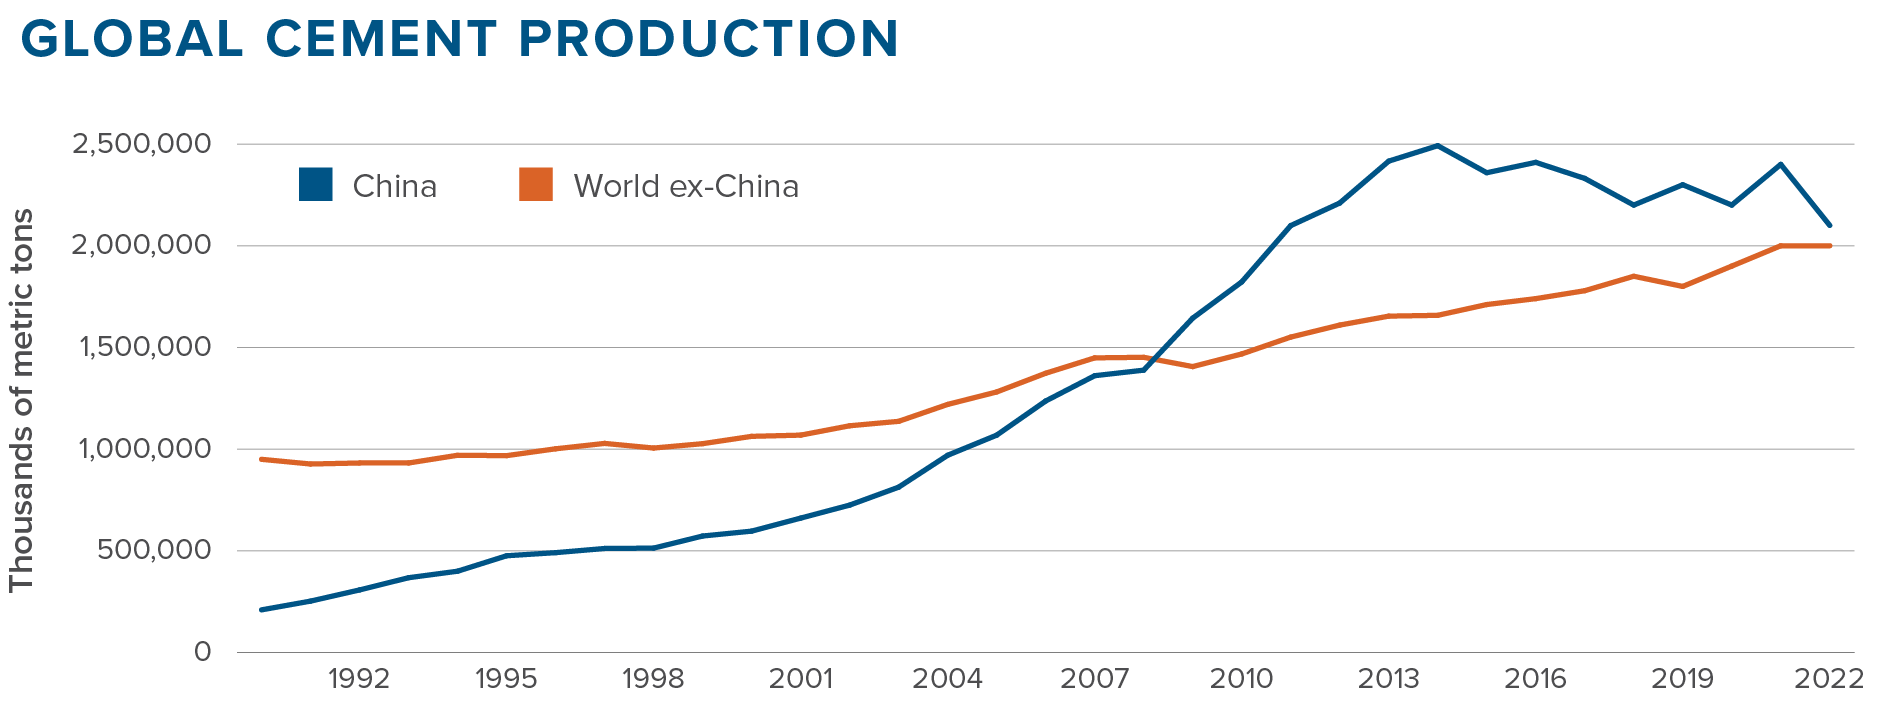 Global cement production